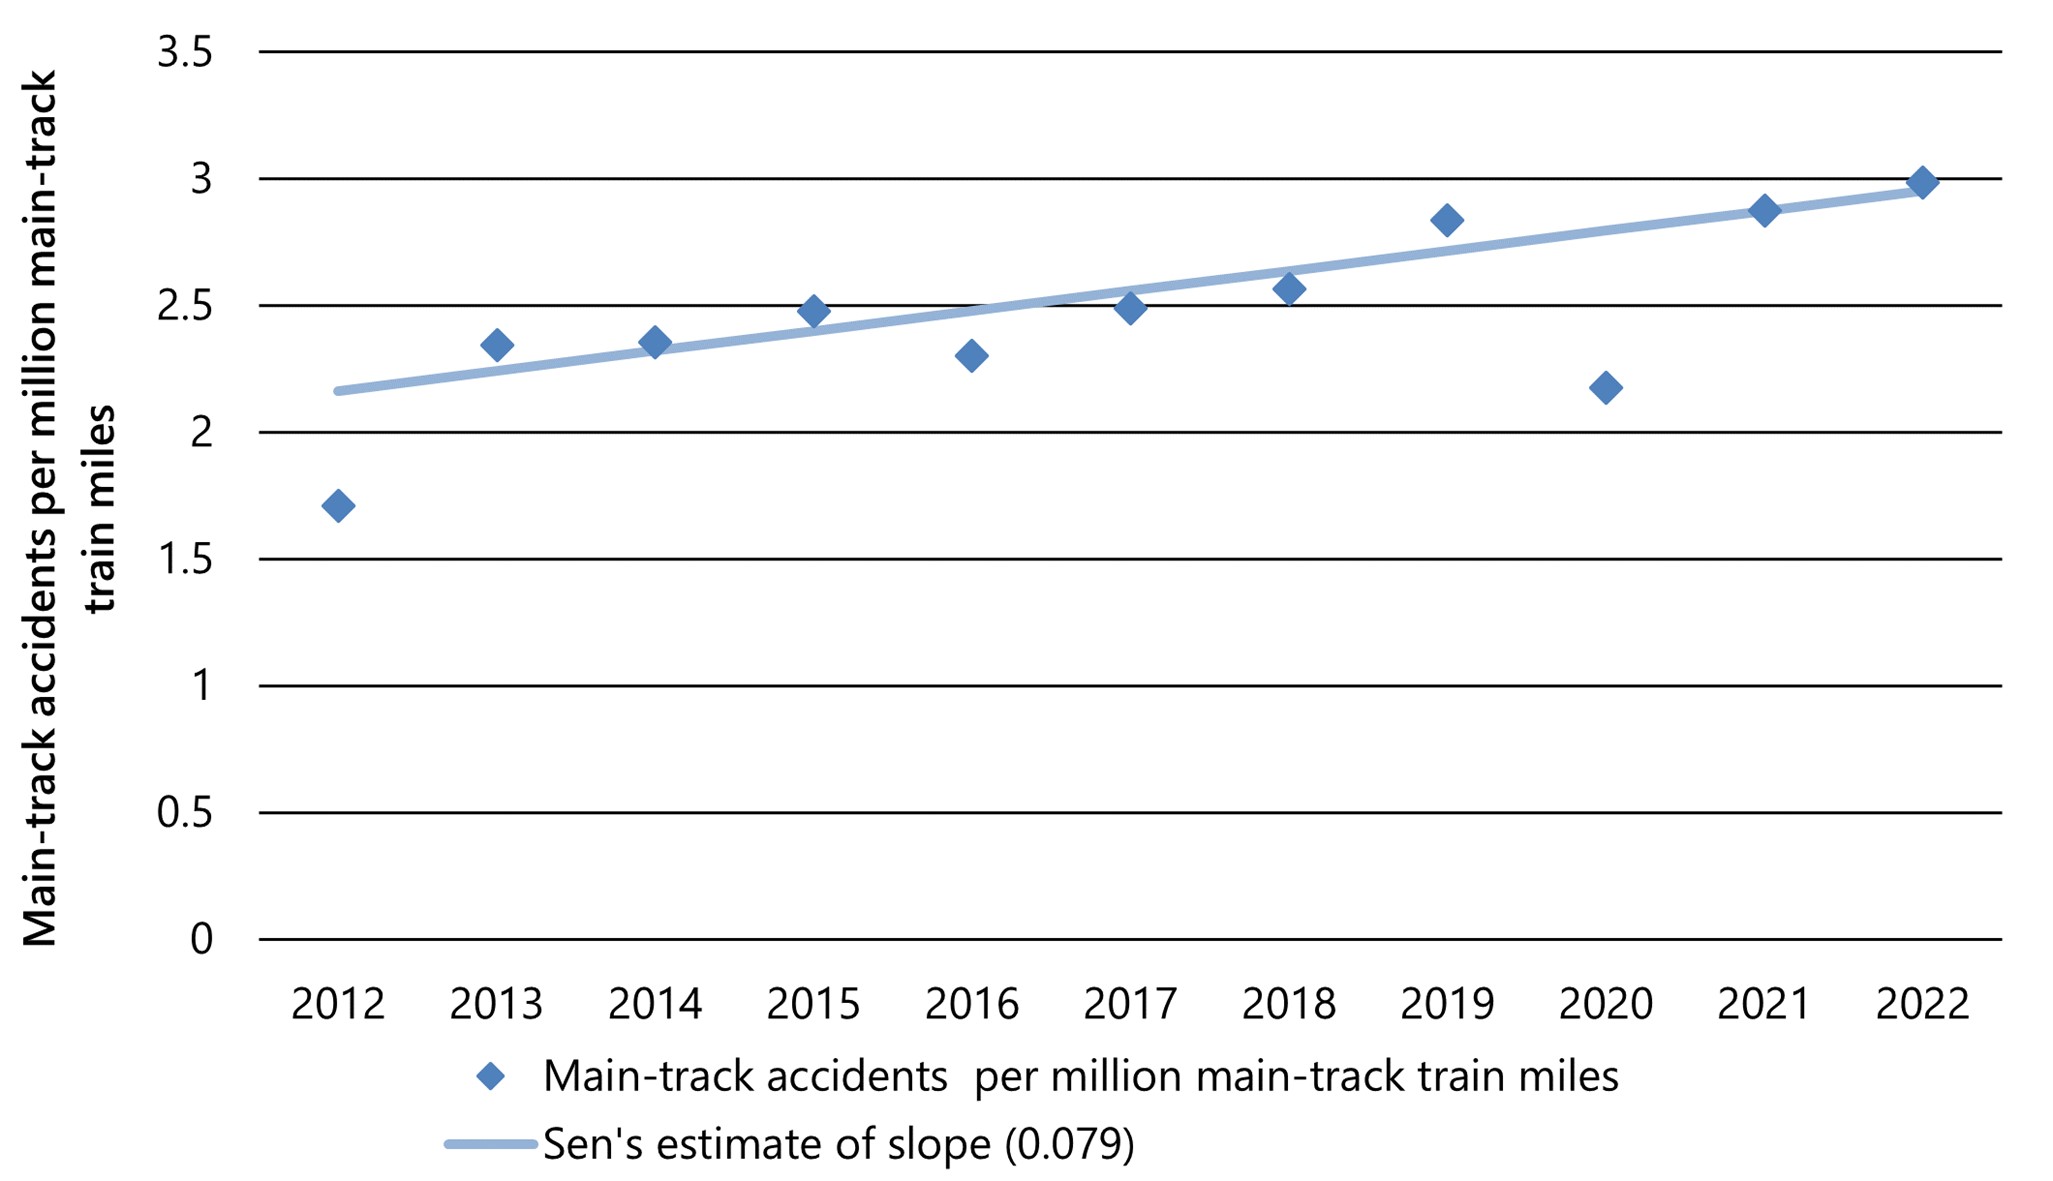 Main-track accident rate, 2012 to 2022